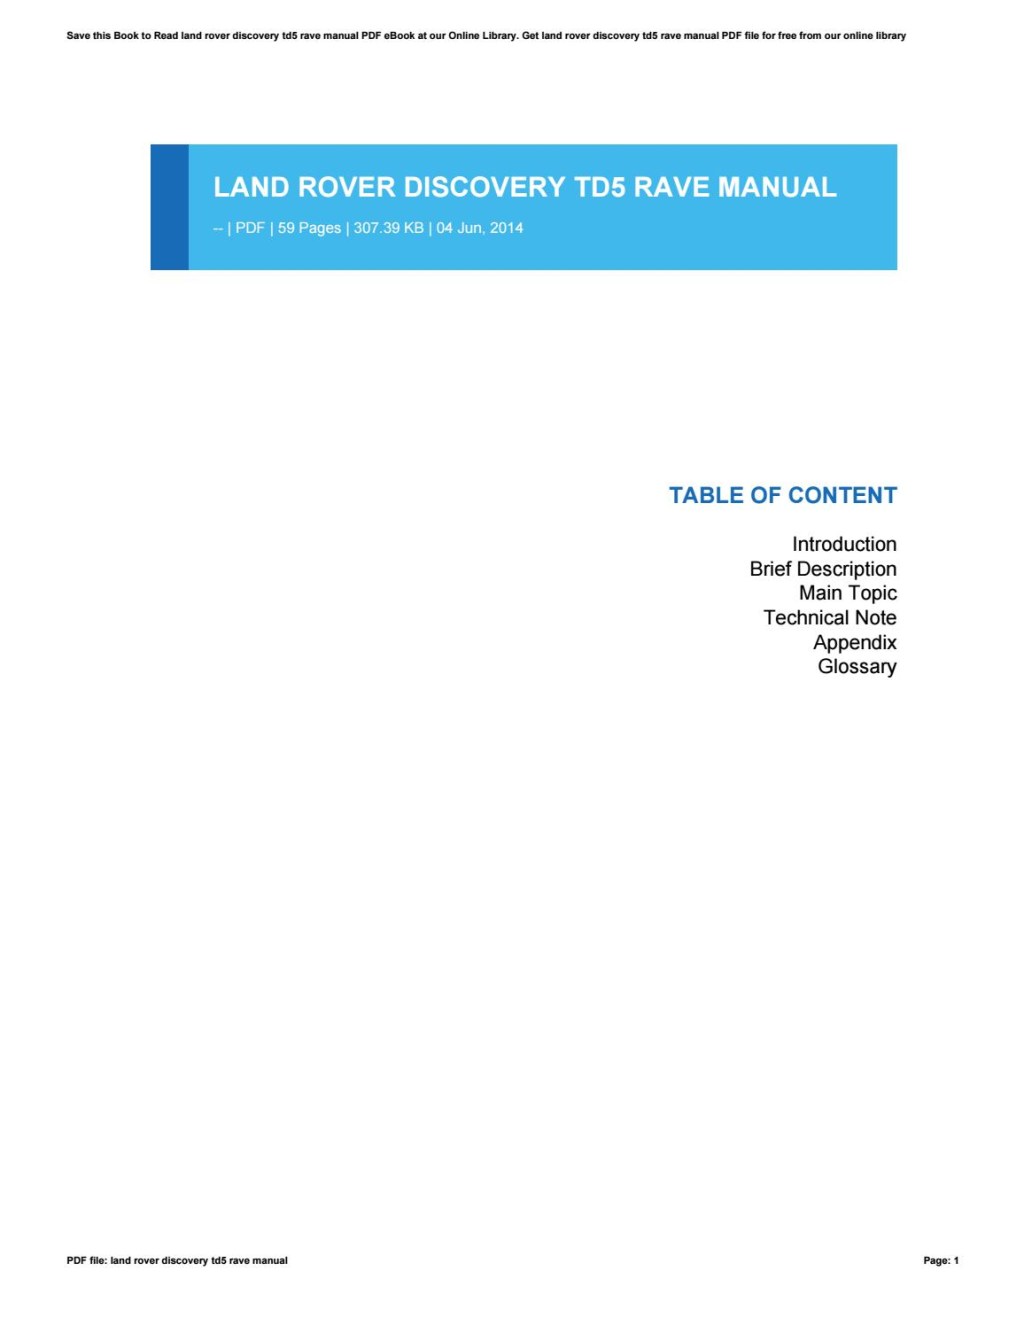 Picture of: Land rover discovery td rave manual by mankyrecords – Issuu